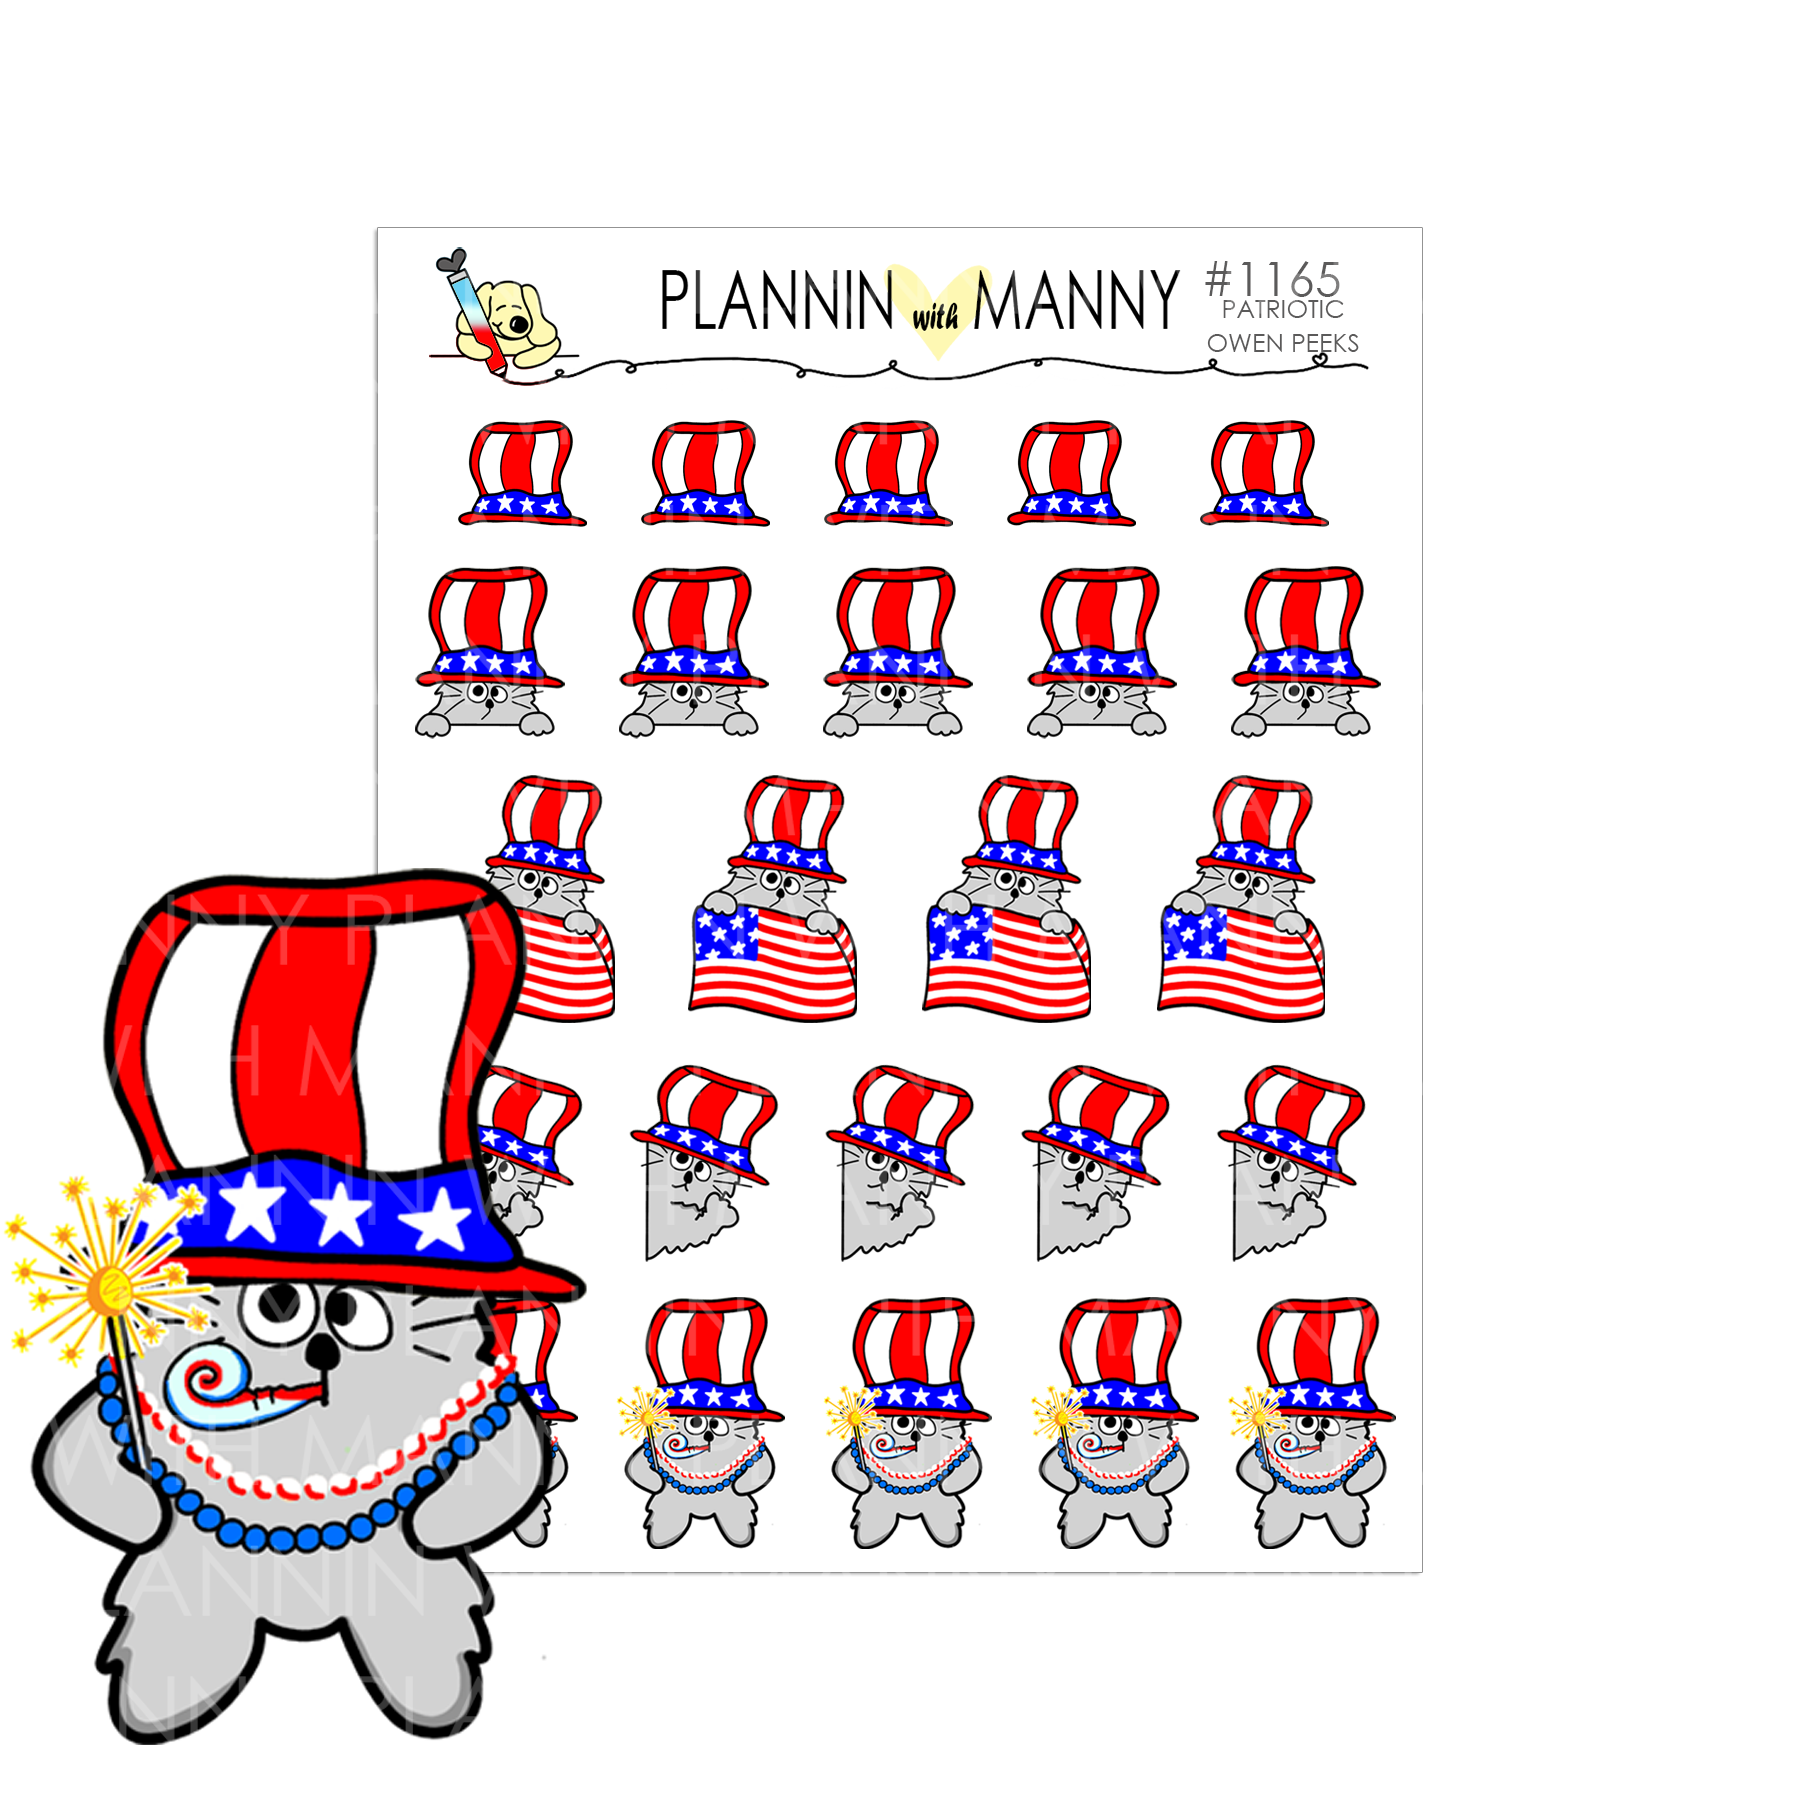 1165 PATRIOTIC PEEK A BOO OWEN Planner Stickers - Freedom Reigns Collection